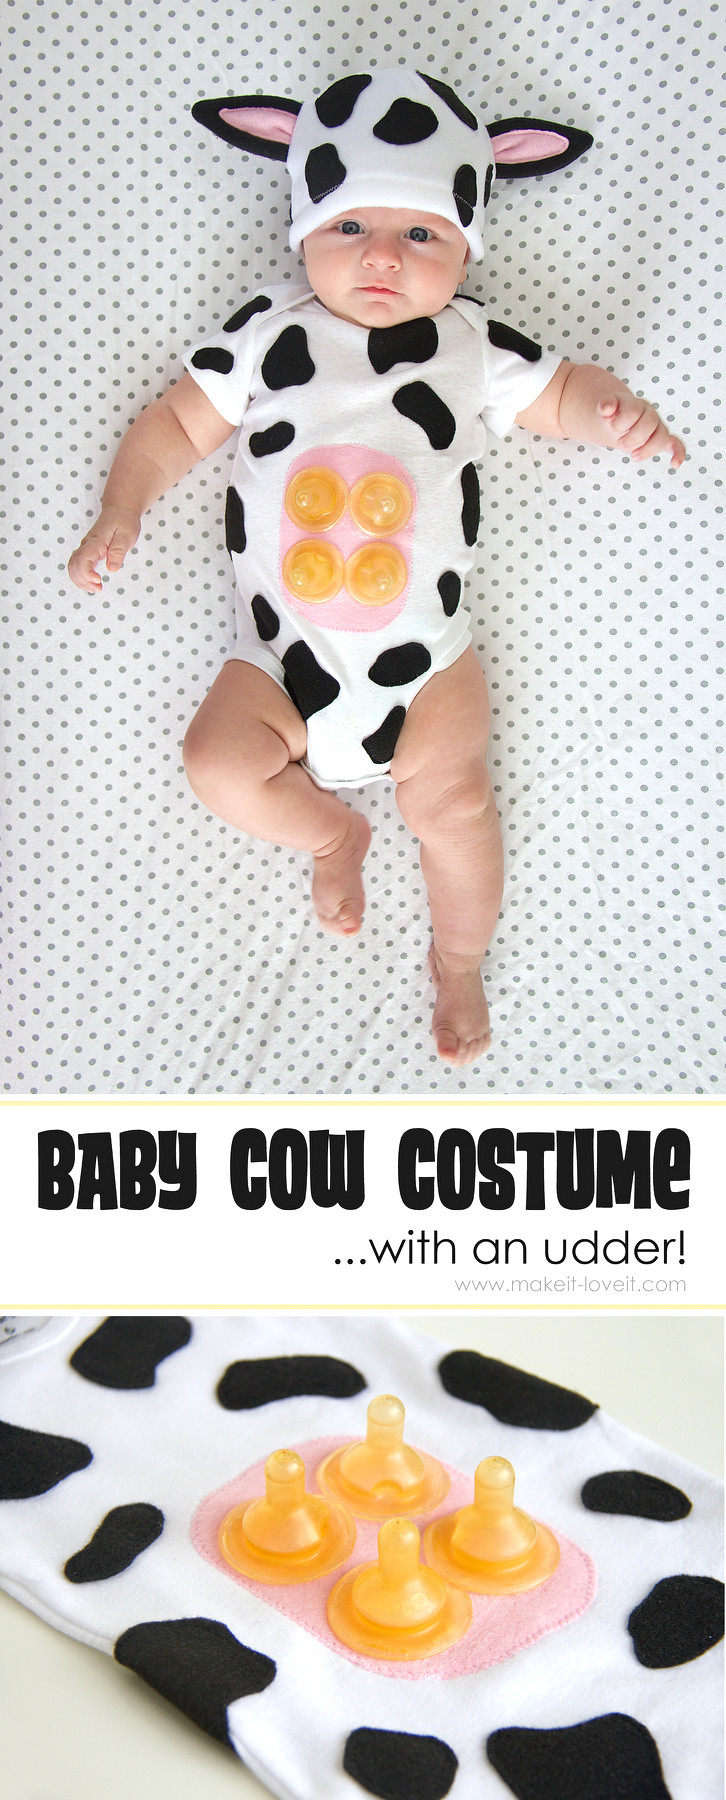 DIY Cow Costume
 Baby Cow Costume with an UDDER